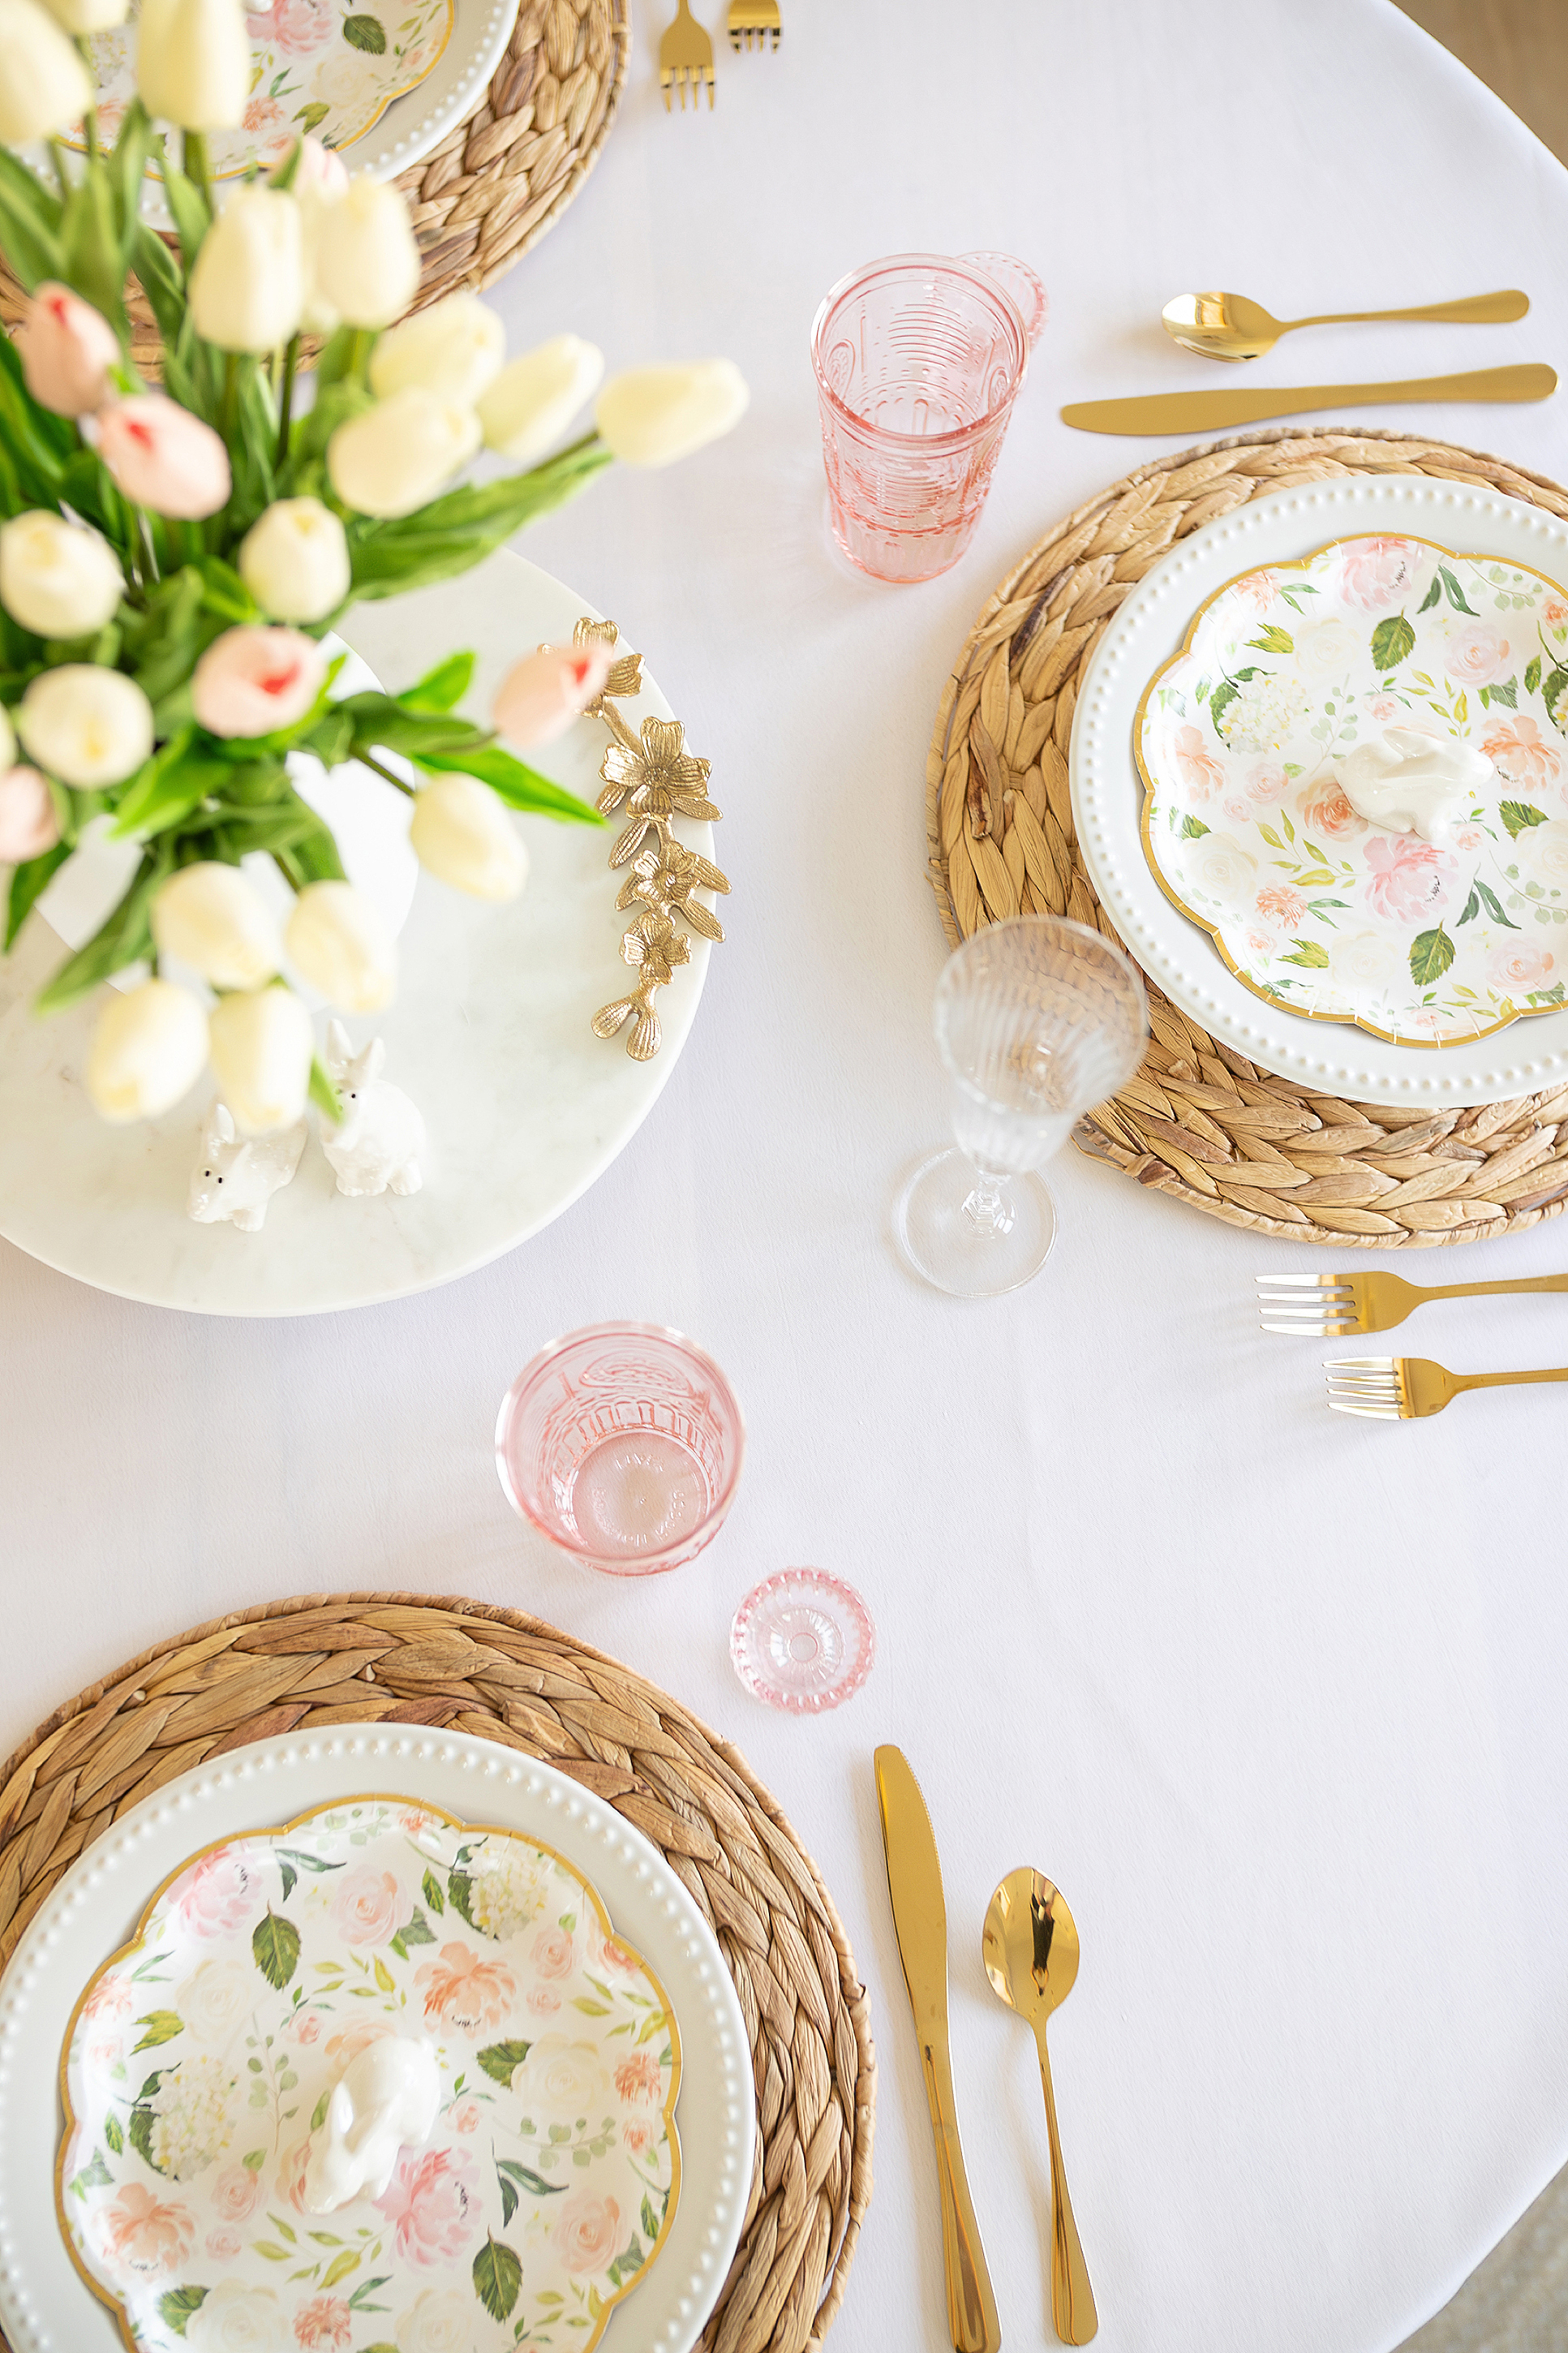 A pink and white pastel table set for Easter with tulips and pink glasses.